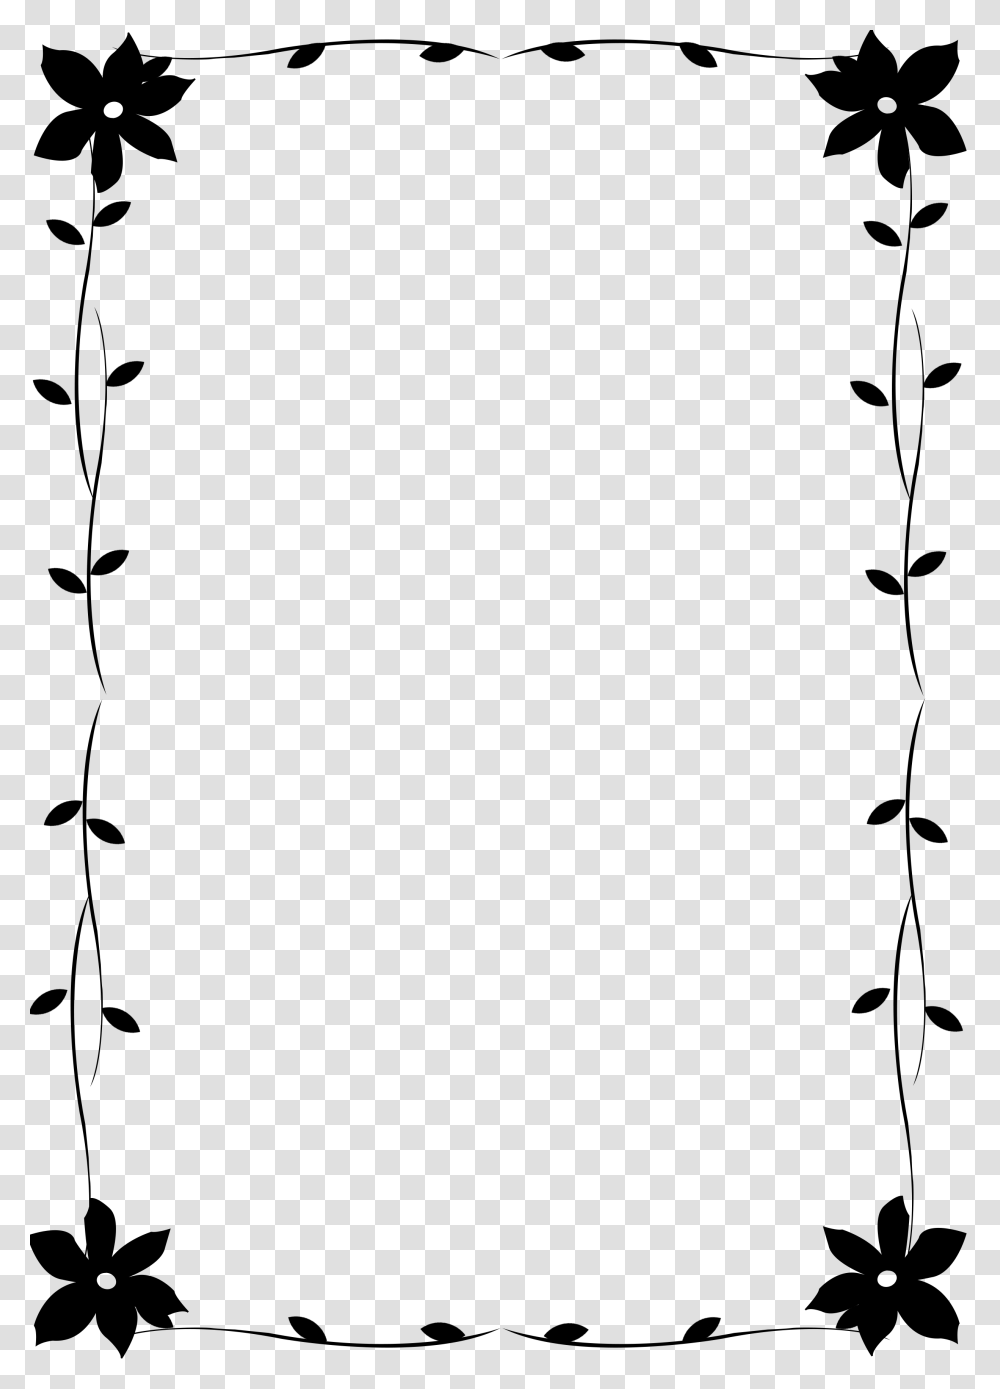 Border Silhouette Border In Silhouette, Utility Pole, Arrow, Leisure Activities Transparent Png